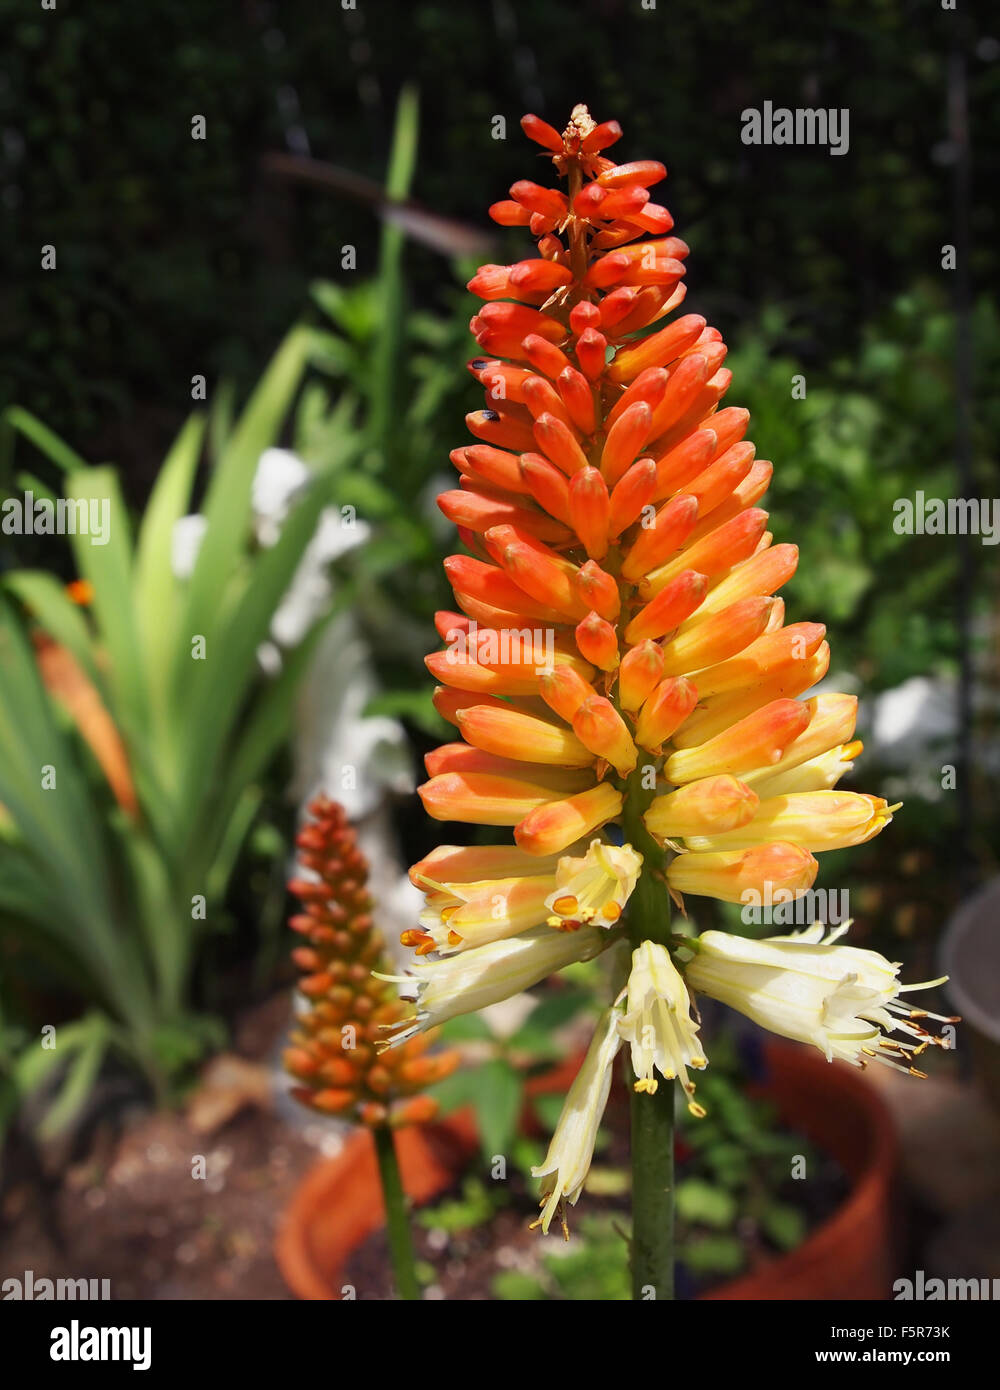 A tall, brilliant colored Torch Lily, also known as Red Hot Poker Plant, stands in the middle of a garden in full bloom in summe Stock Photo